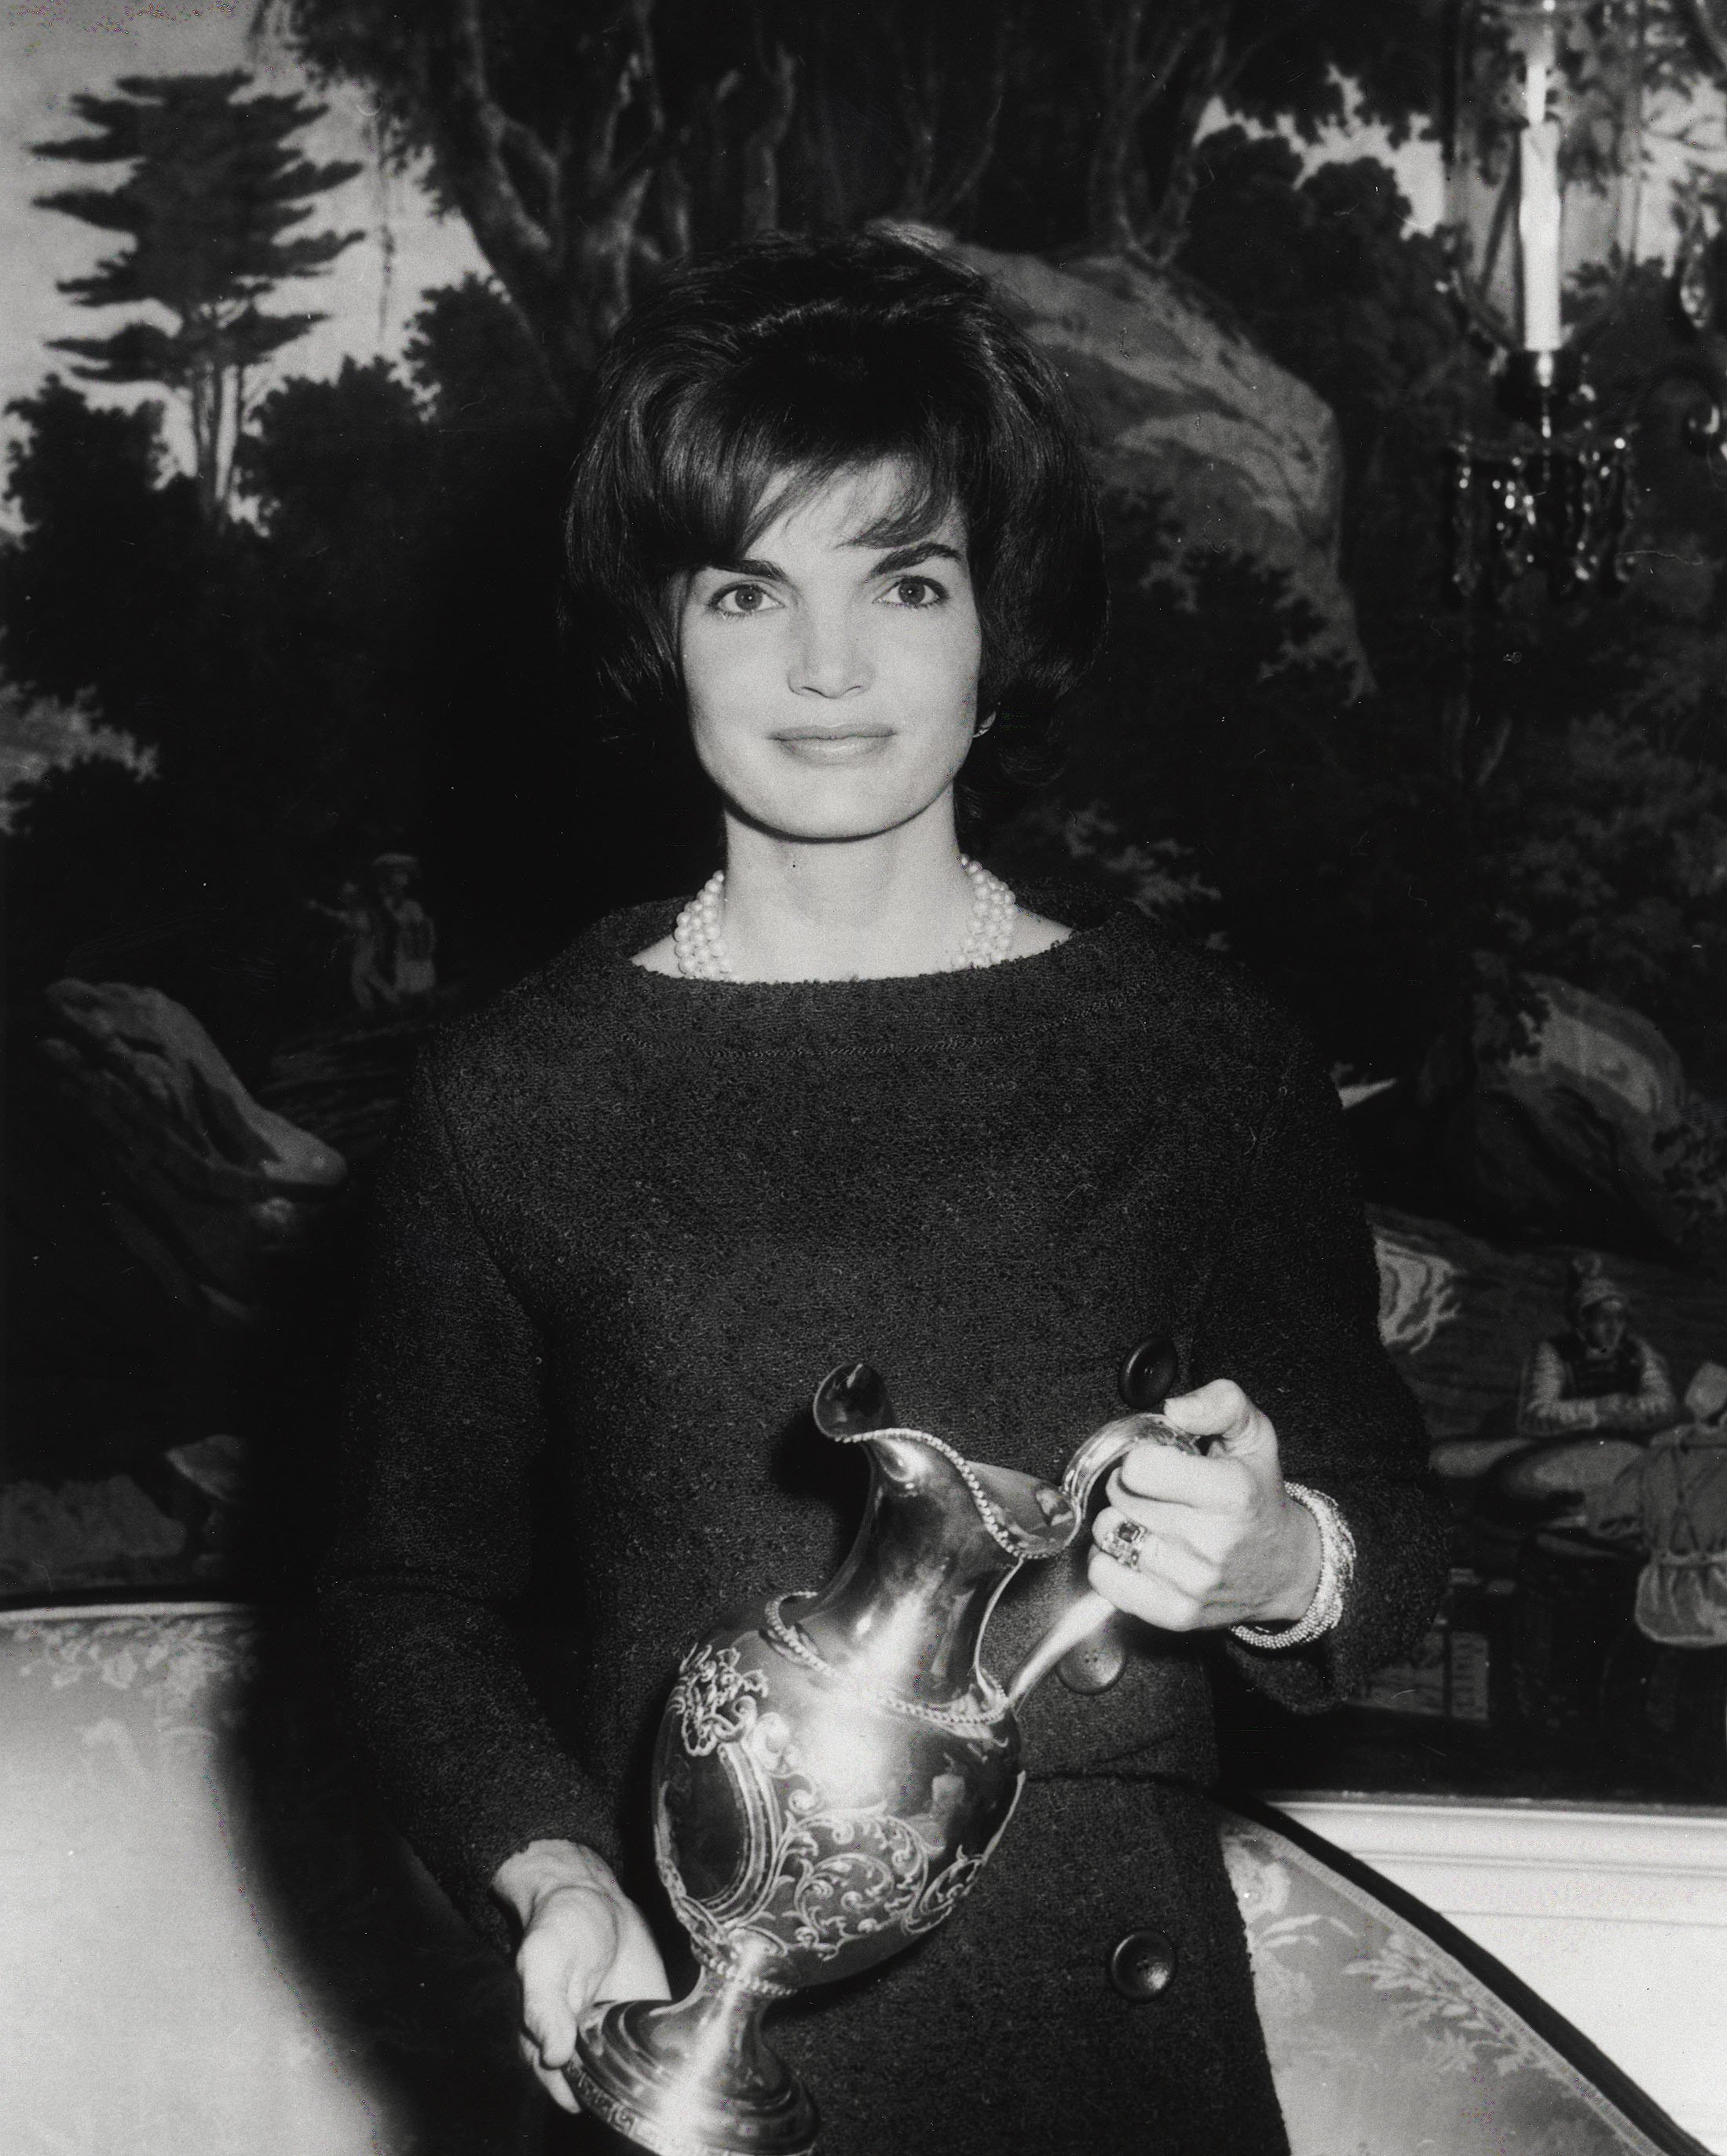 First Lady Jacqueline Kennedy poses for a photograph while holding a gift